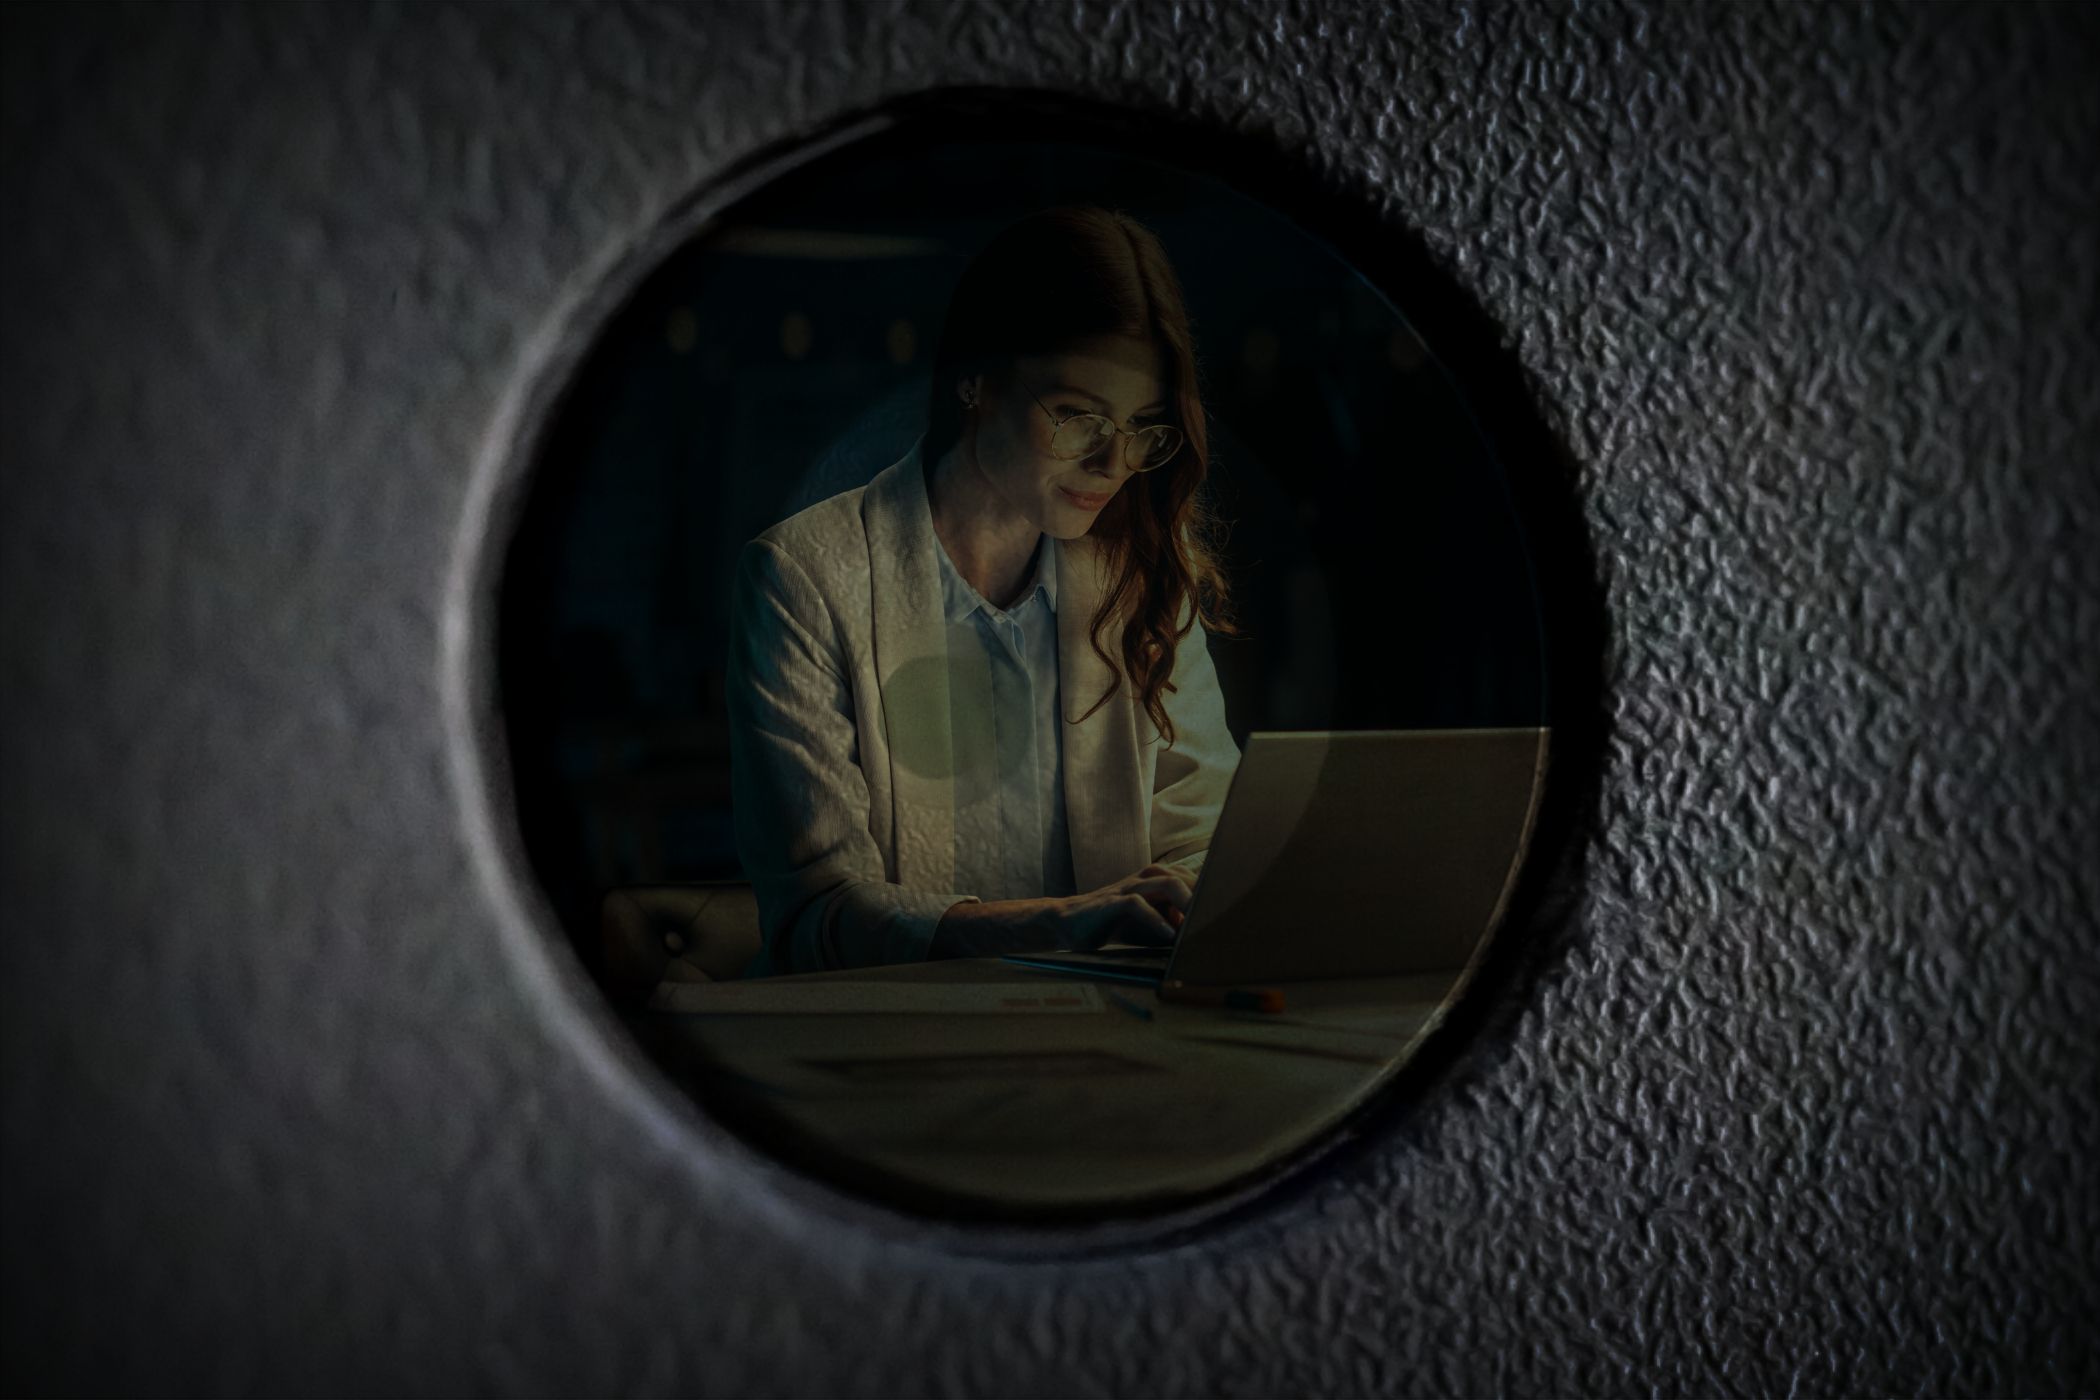 A person working that is seen through a reflection on a webcam